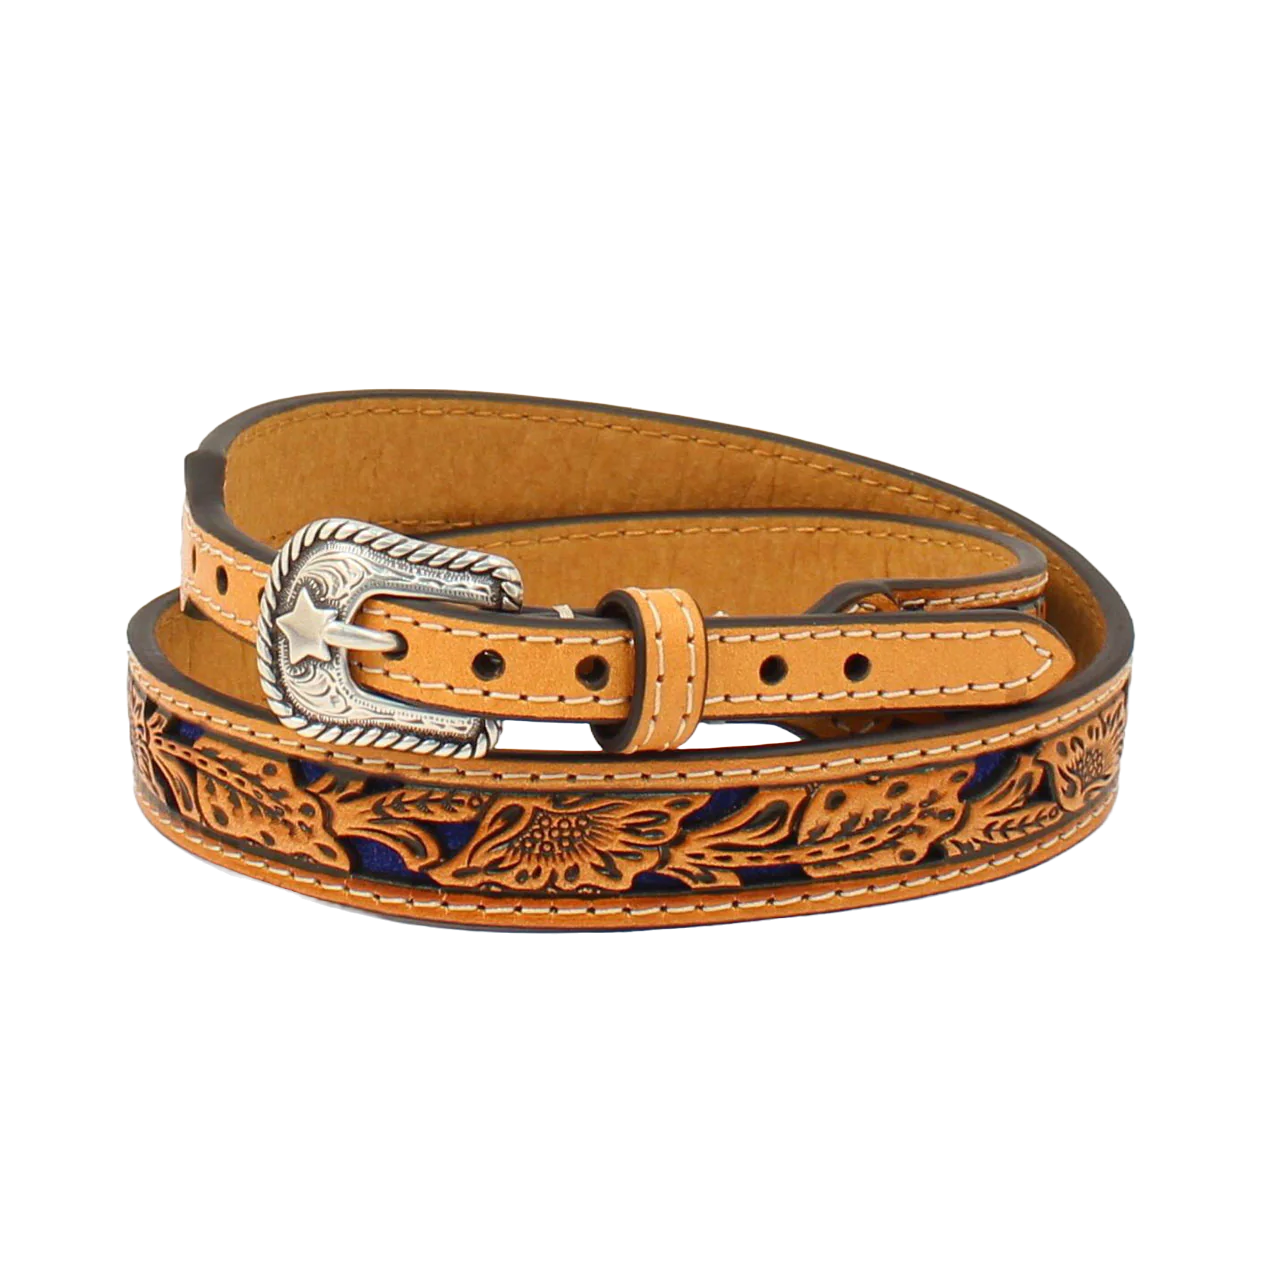 M&F Western Floral Tooled Tan Leather Hatband 0275227